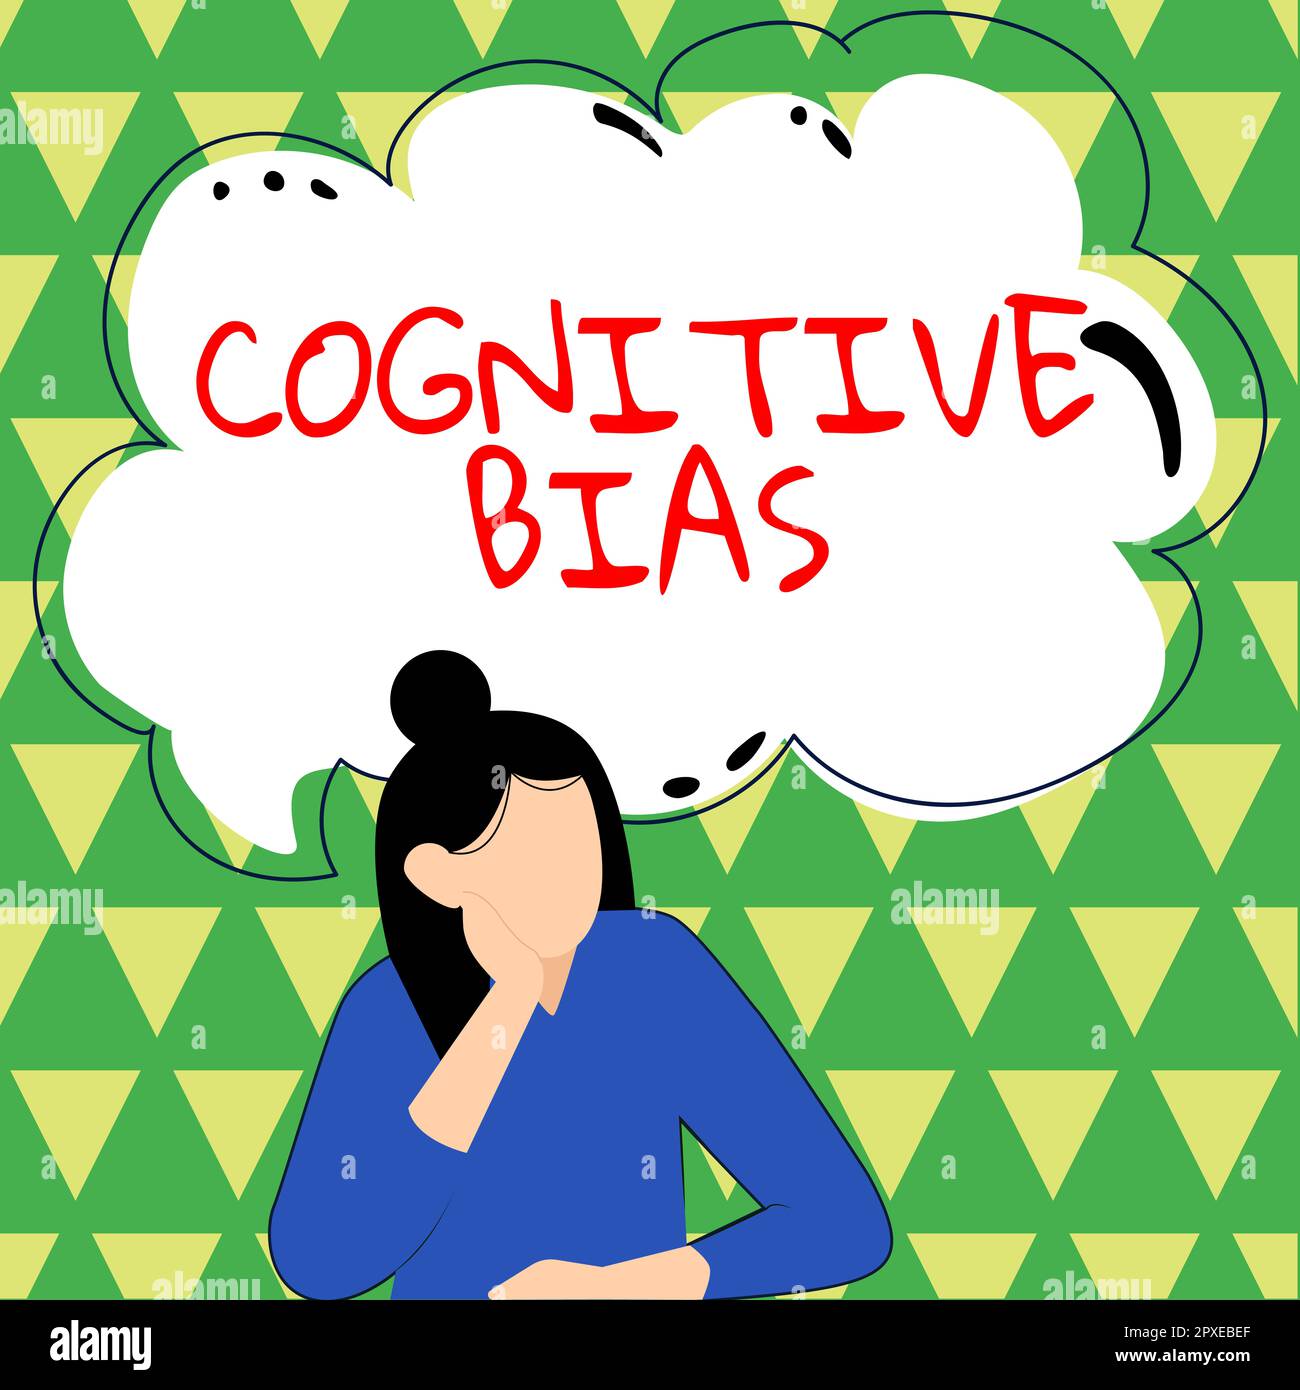 Text sign showing Cognitive Bias, Internet Concept Psychological treatment for mental disorders Stock Photo